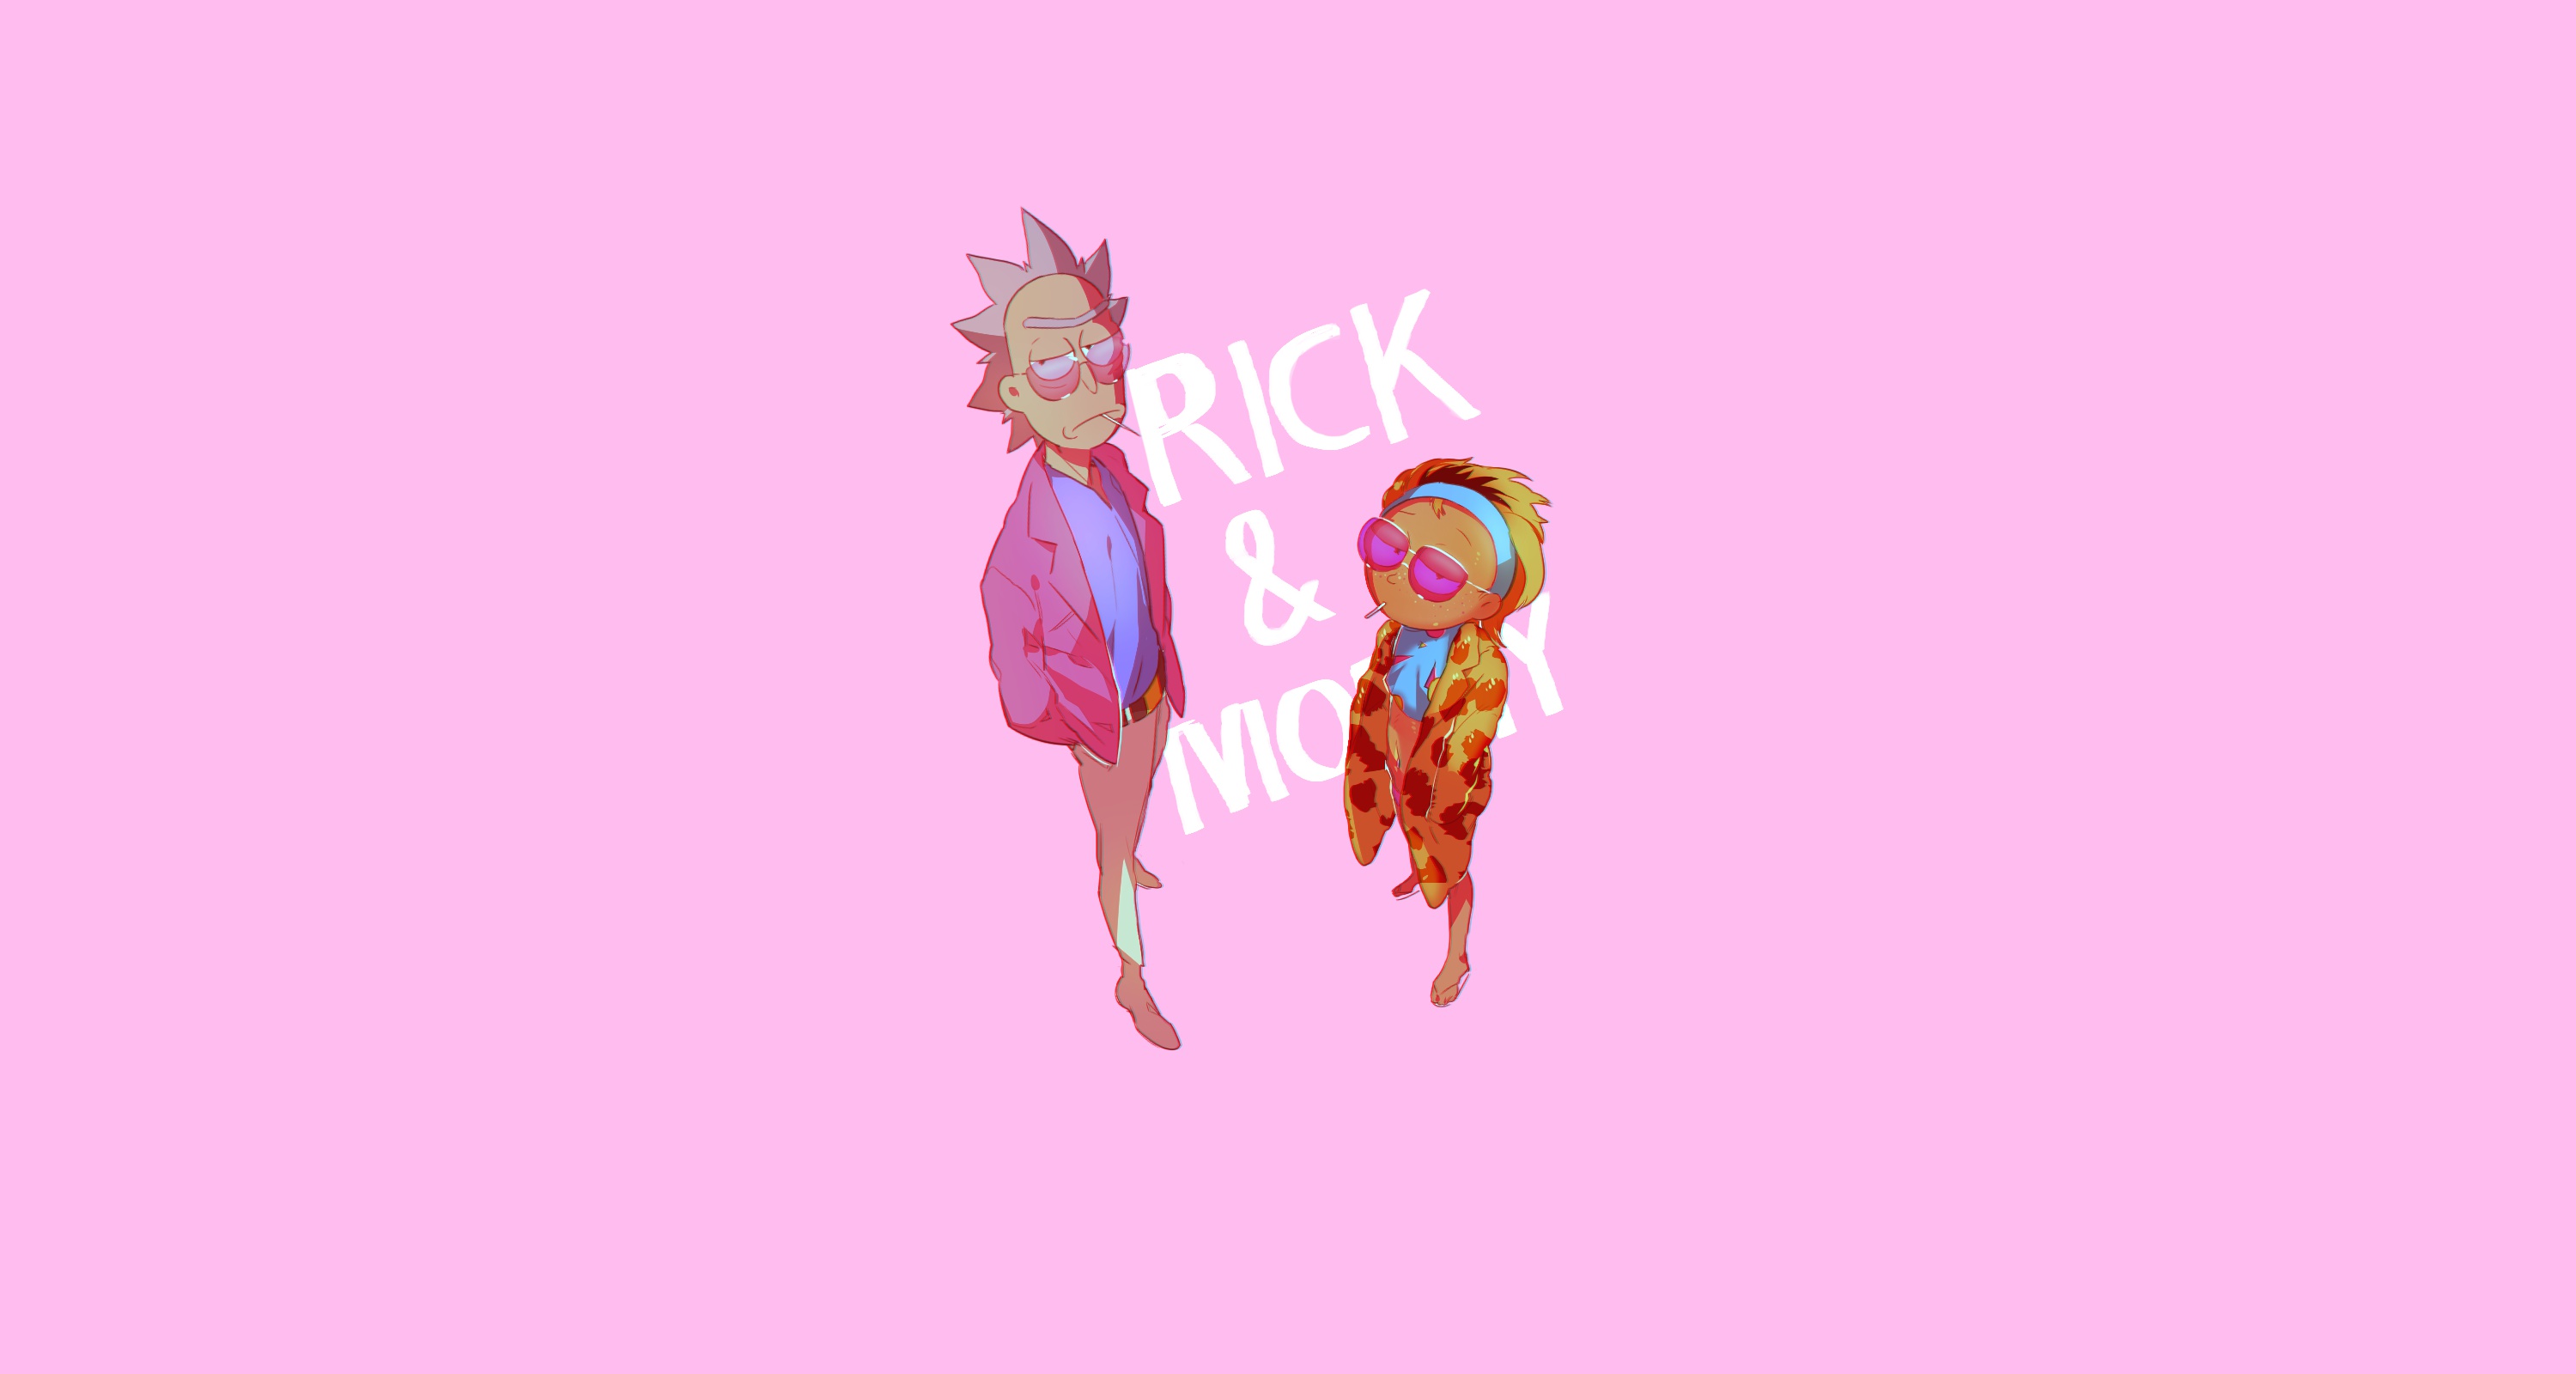 Free HD rick and morty, tv show, morty smith, rick sanchez